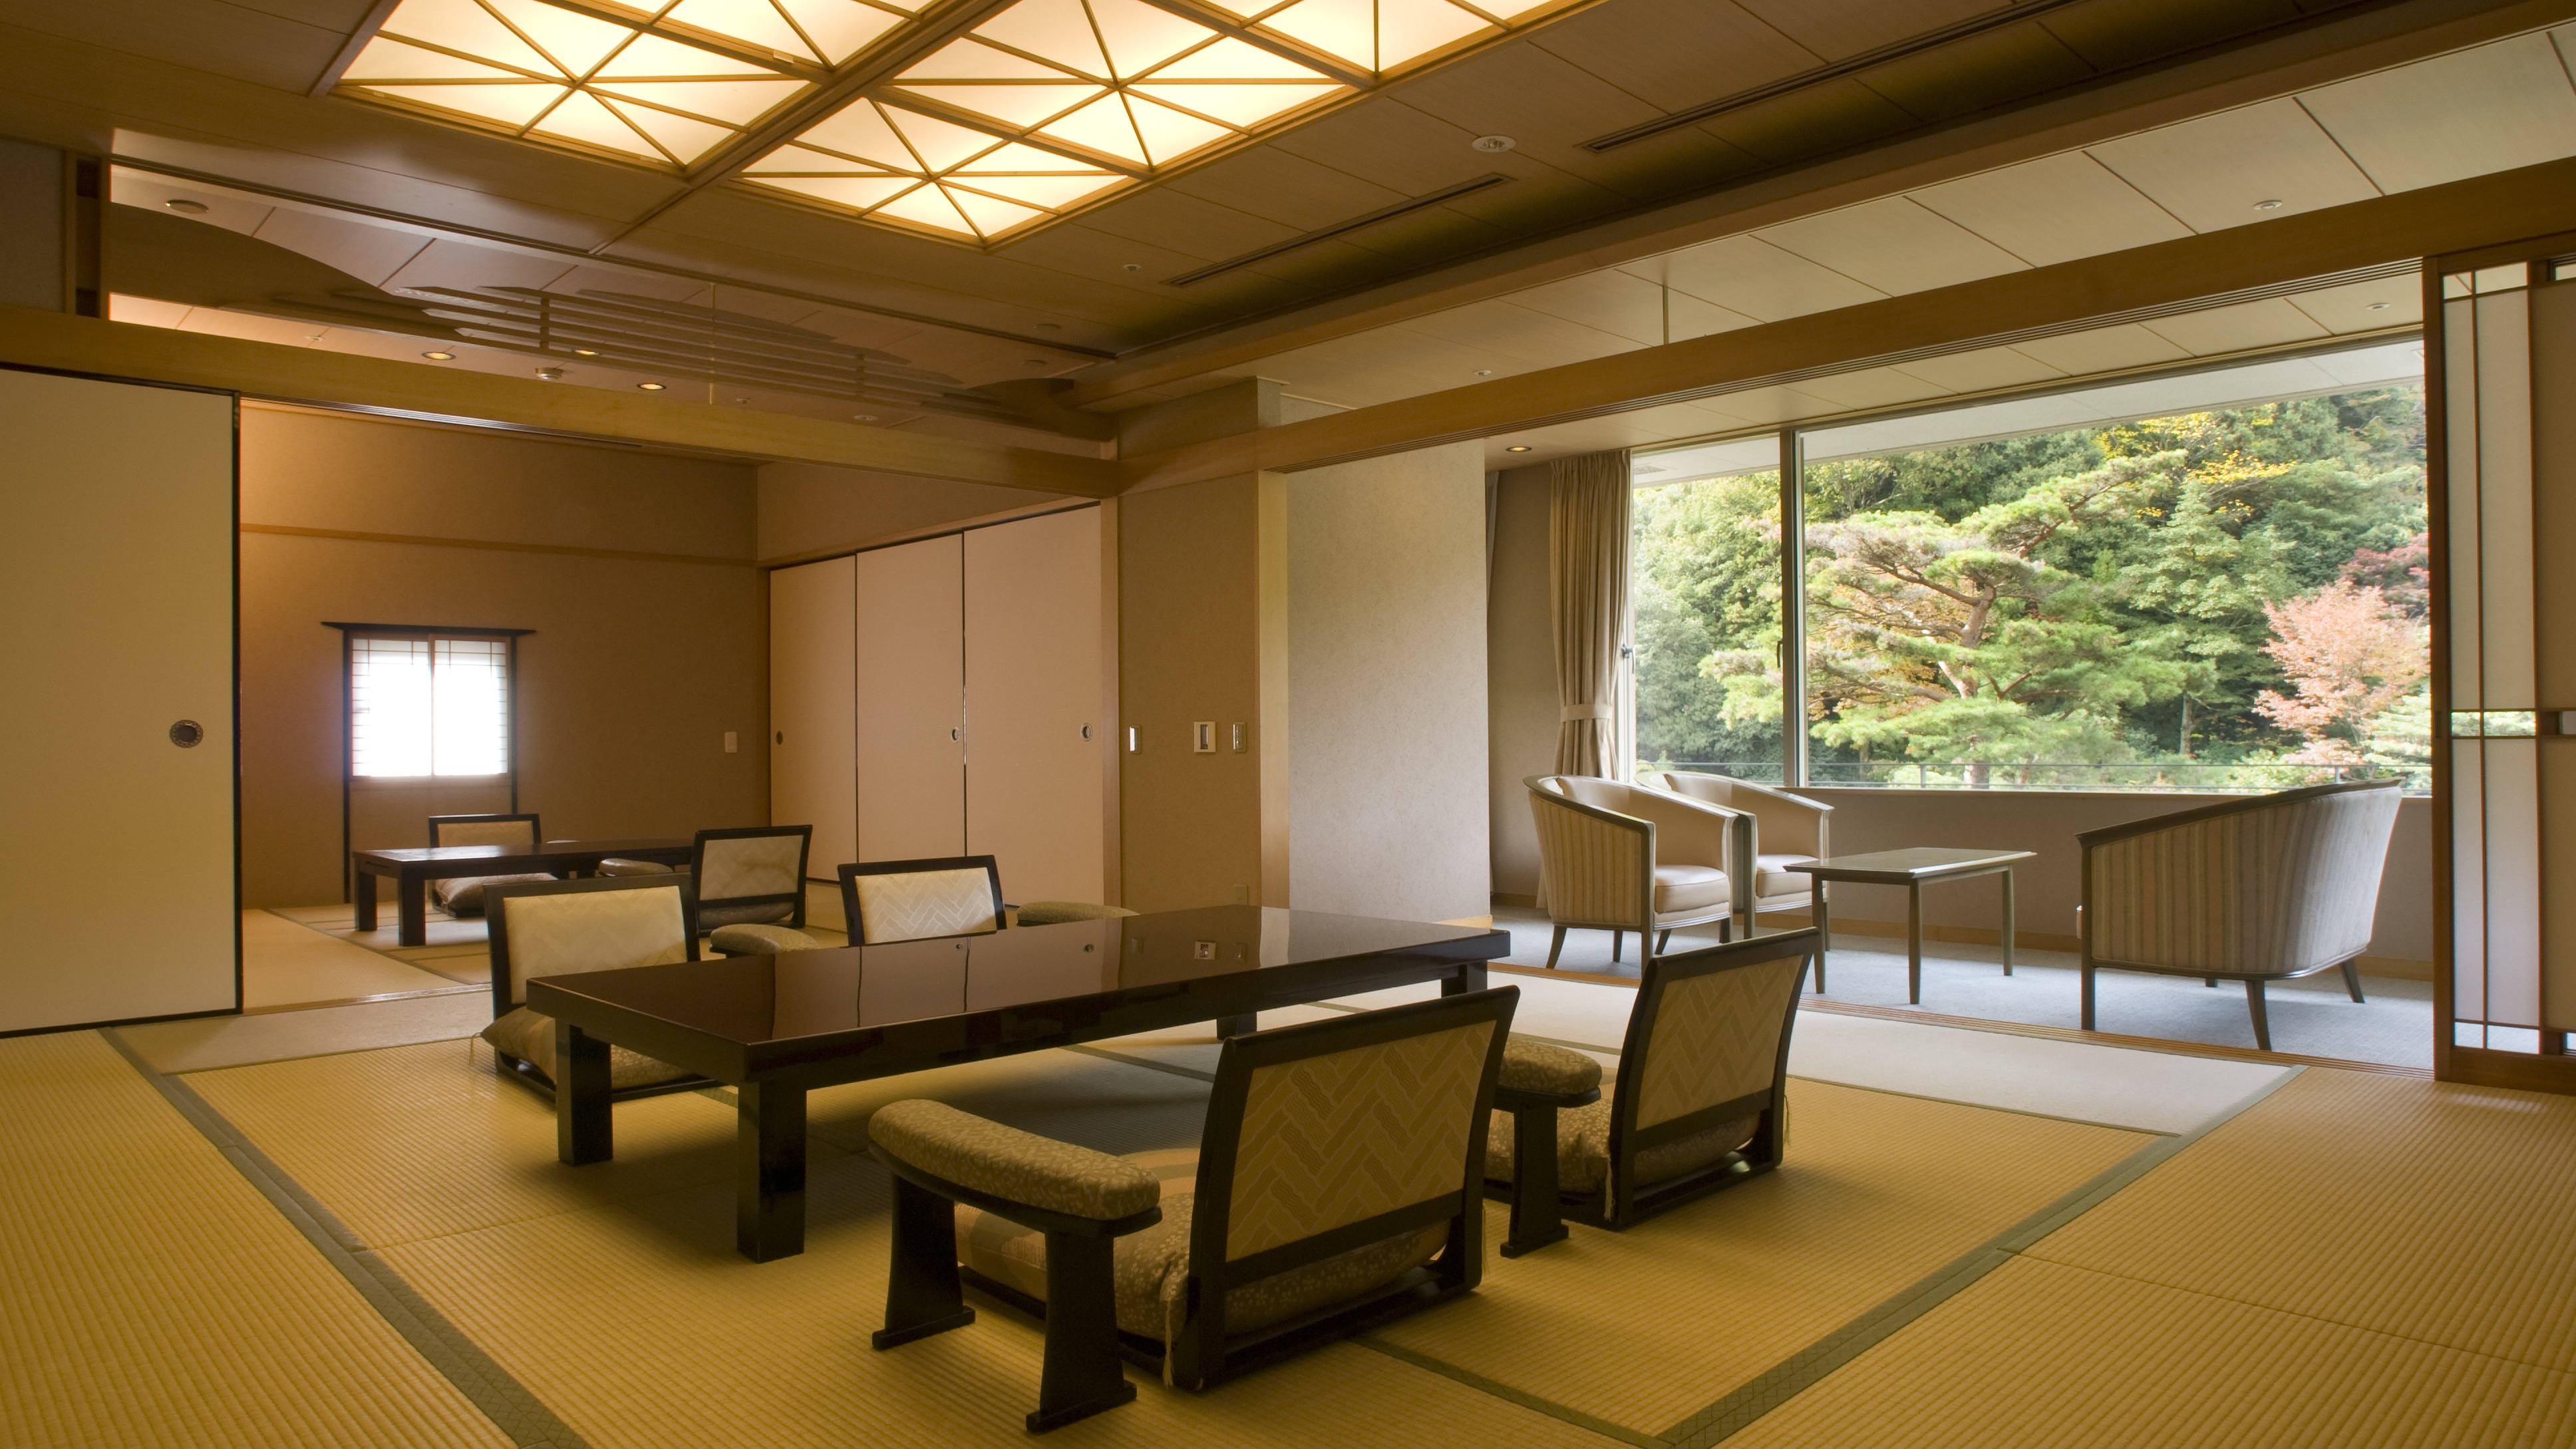 [Square room commitment] Special room ◆ 15 tatami mats + 8 tatami mats + wide rim (10㎡): Capacity 2 to 7 people [1 massage chair available]